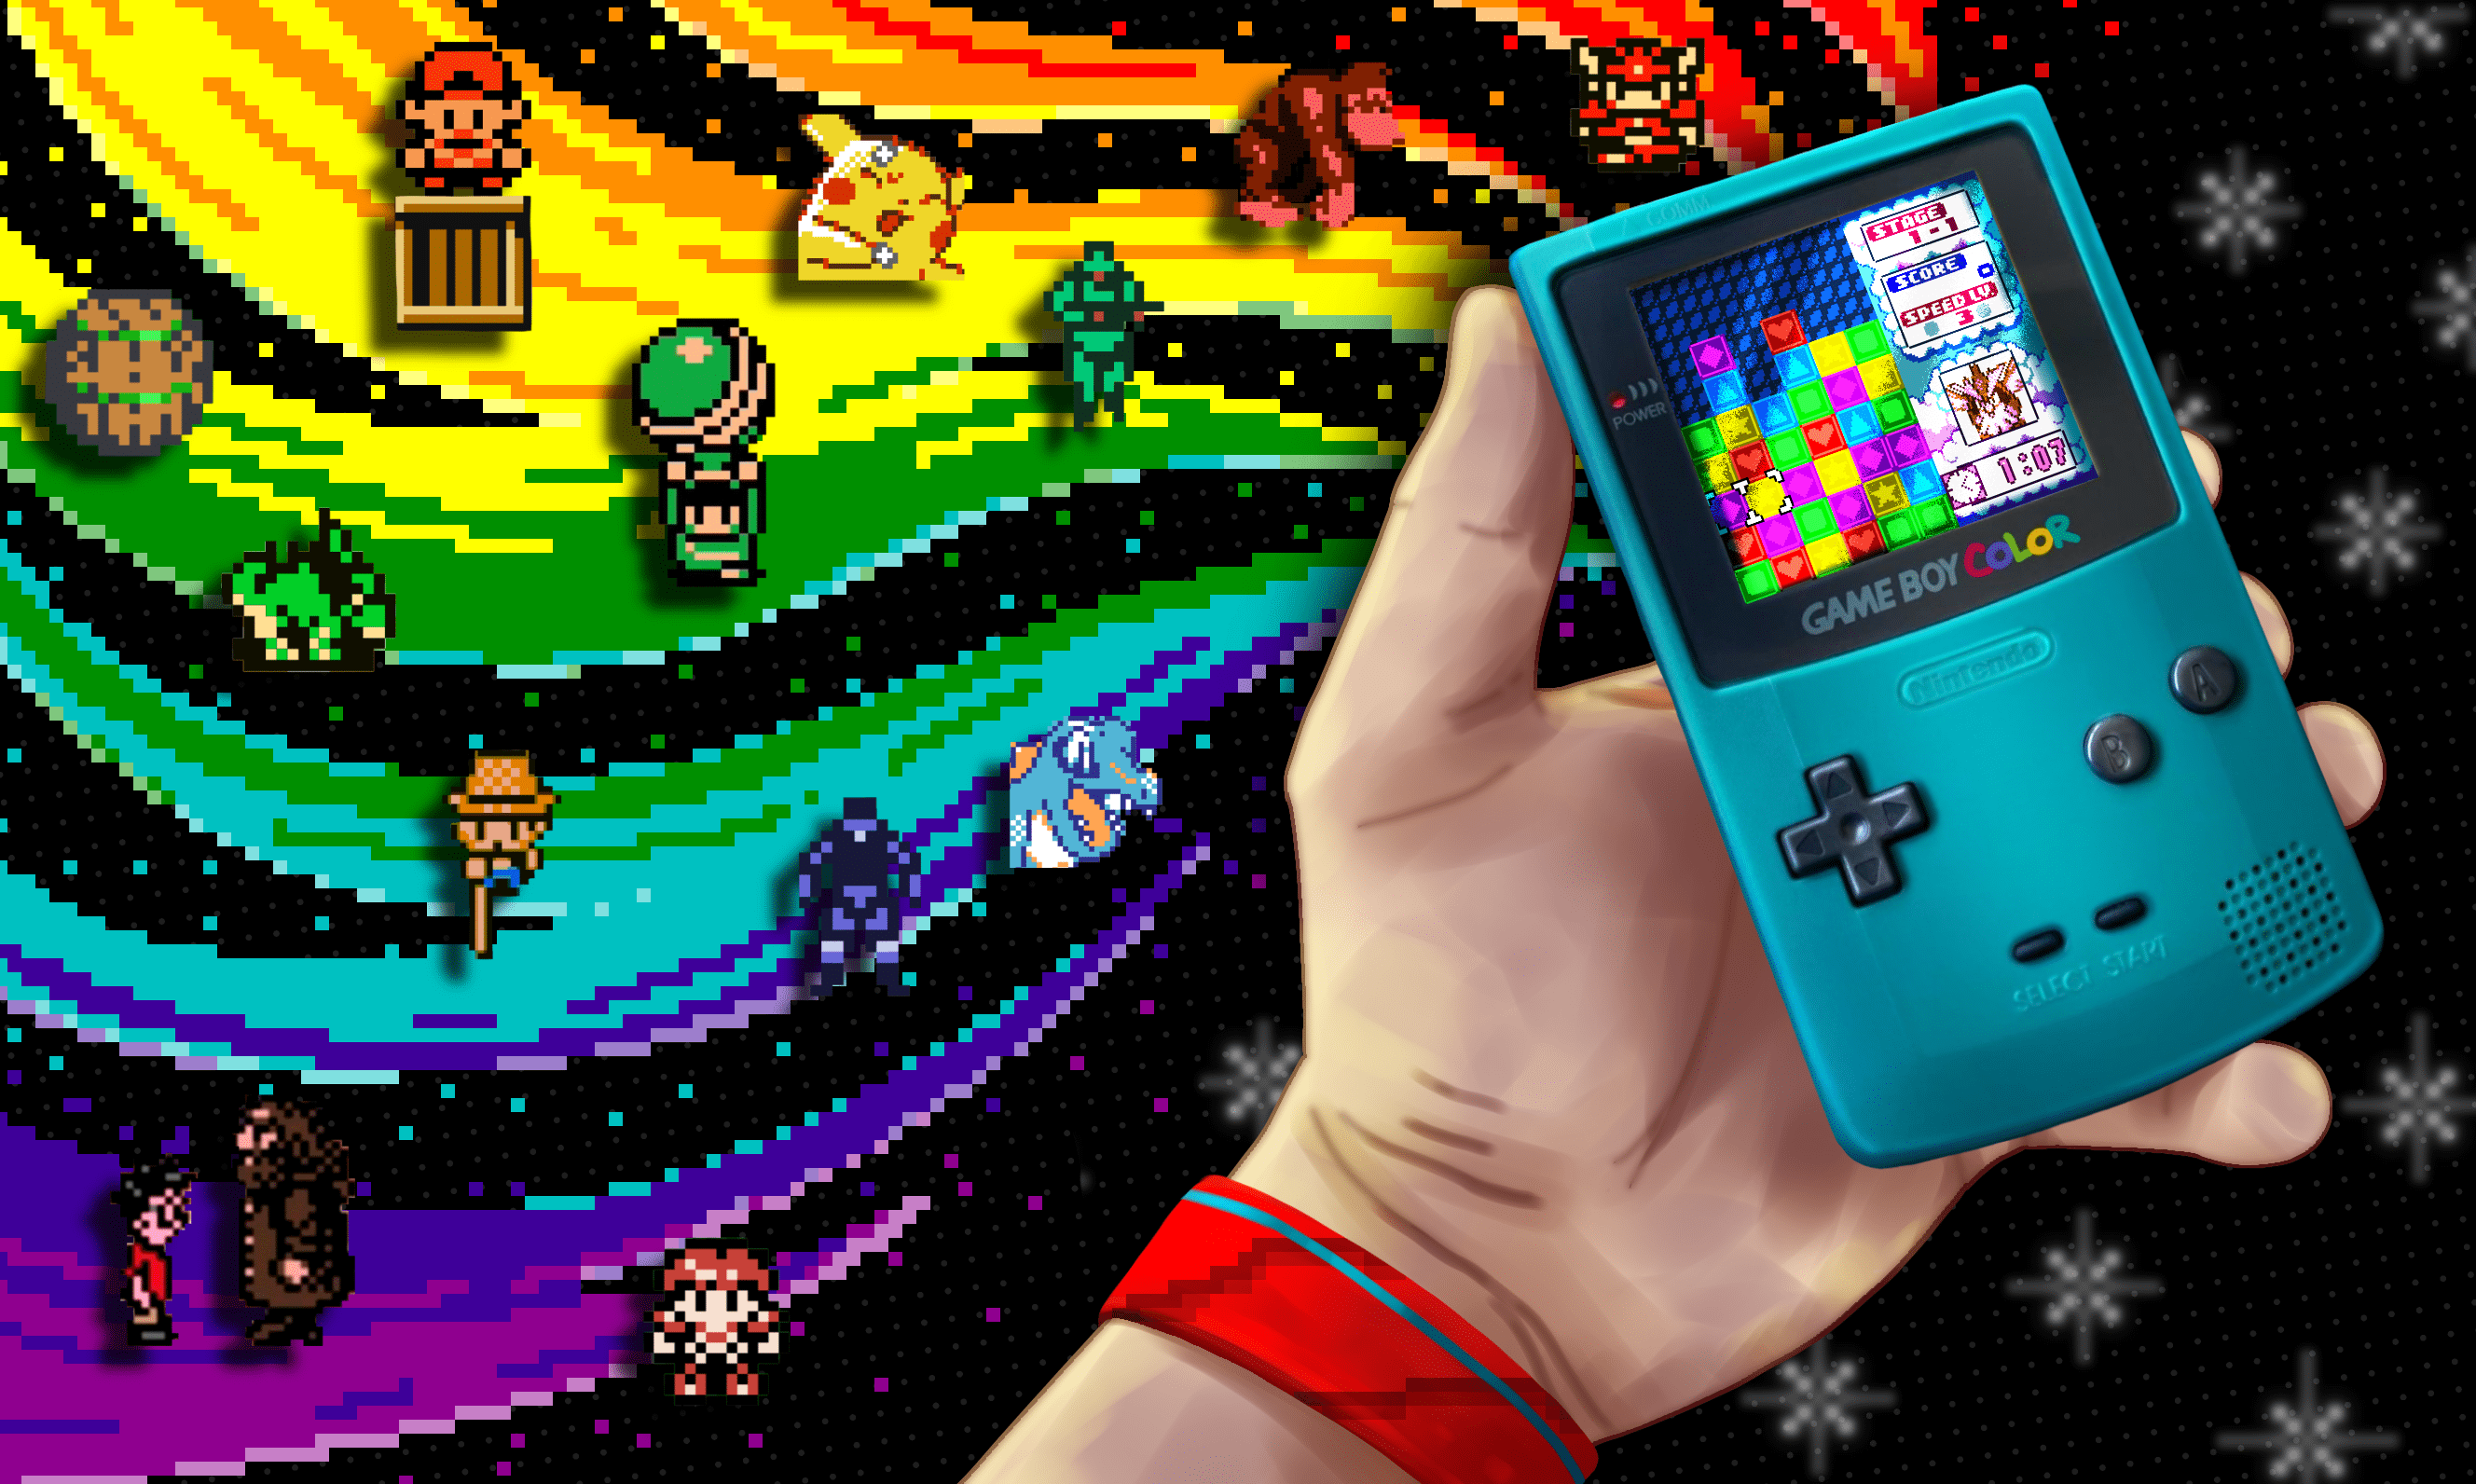 50 Best Game Boy Color (GBC) Games Of All Time